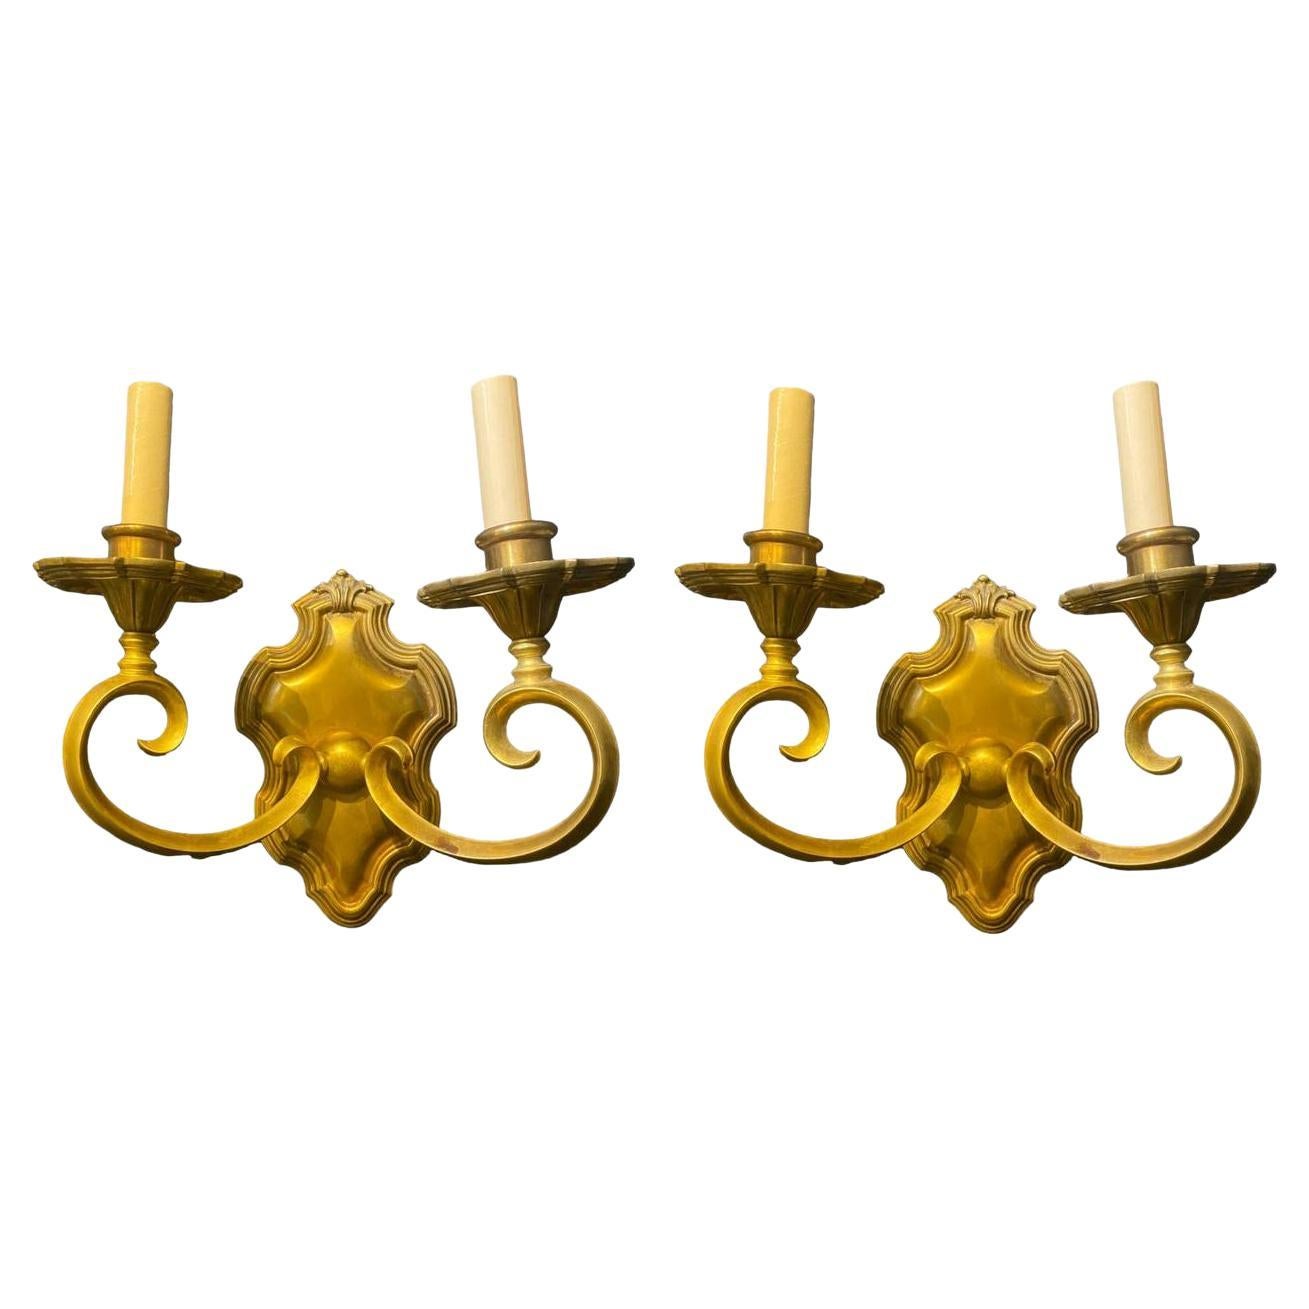 1920's Caldwell Sconces with Scrolled Arms 